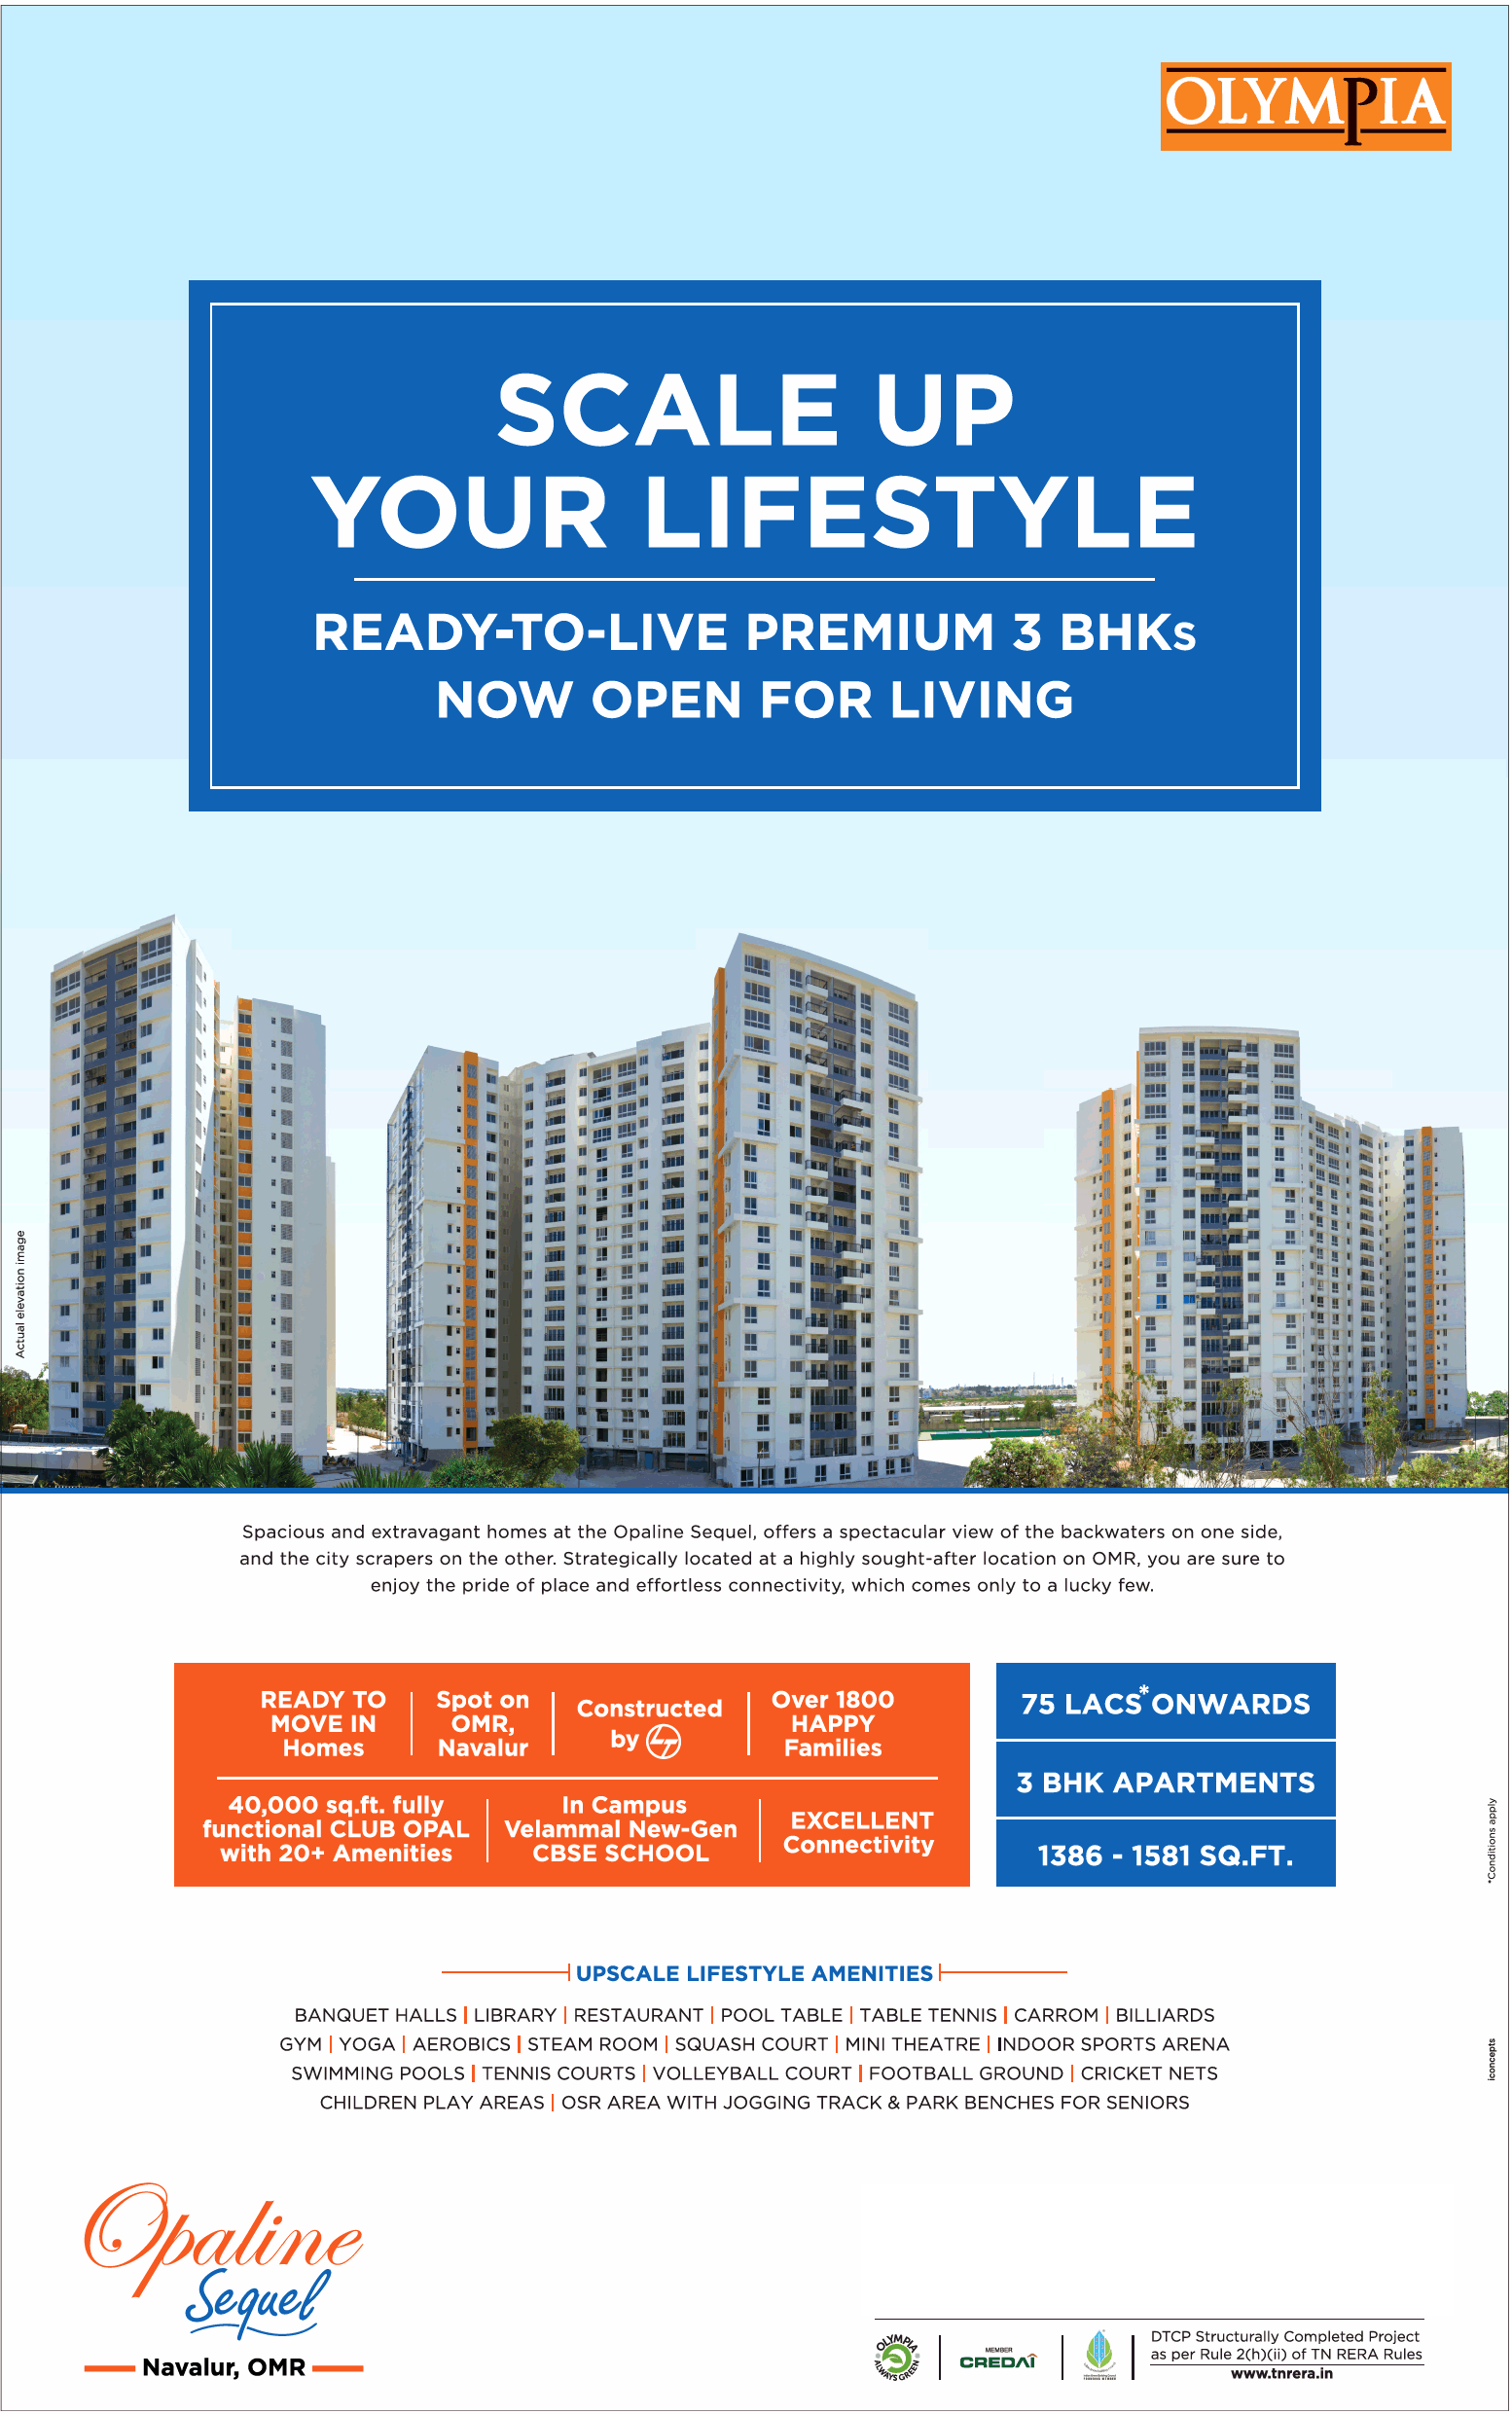 Ready-to-live premium 3 BHKs now open for living at Olympia Opaline Sequel in Chennai Update